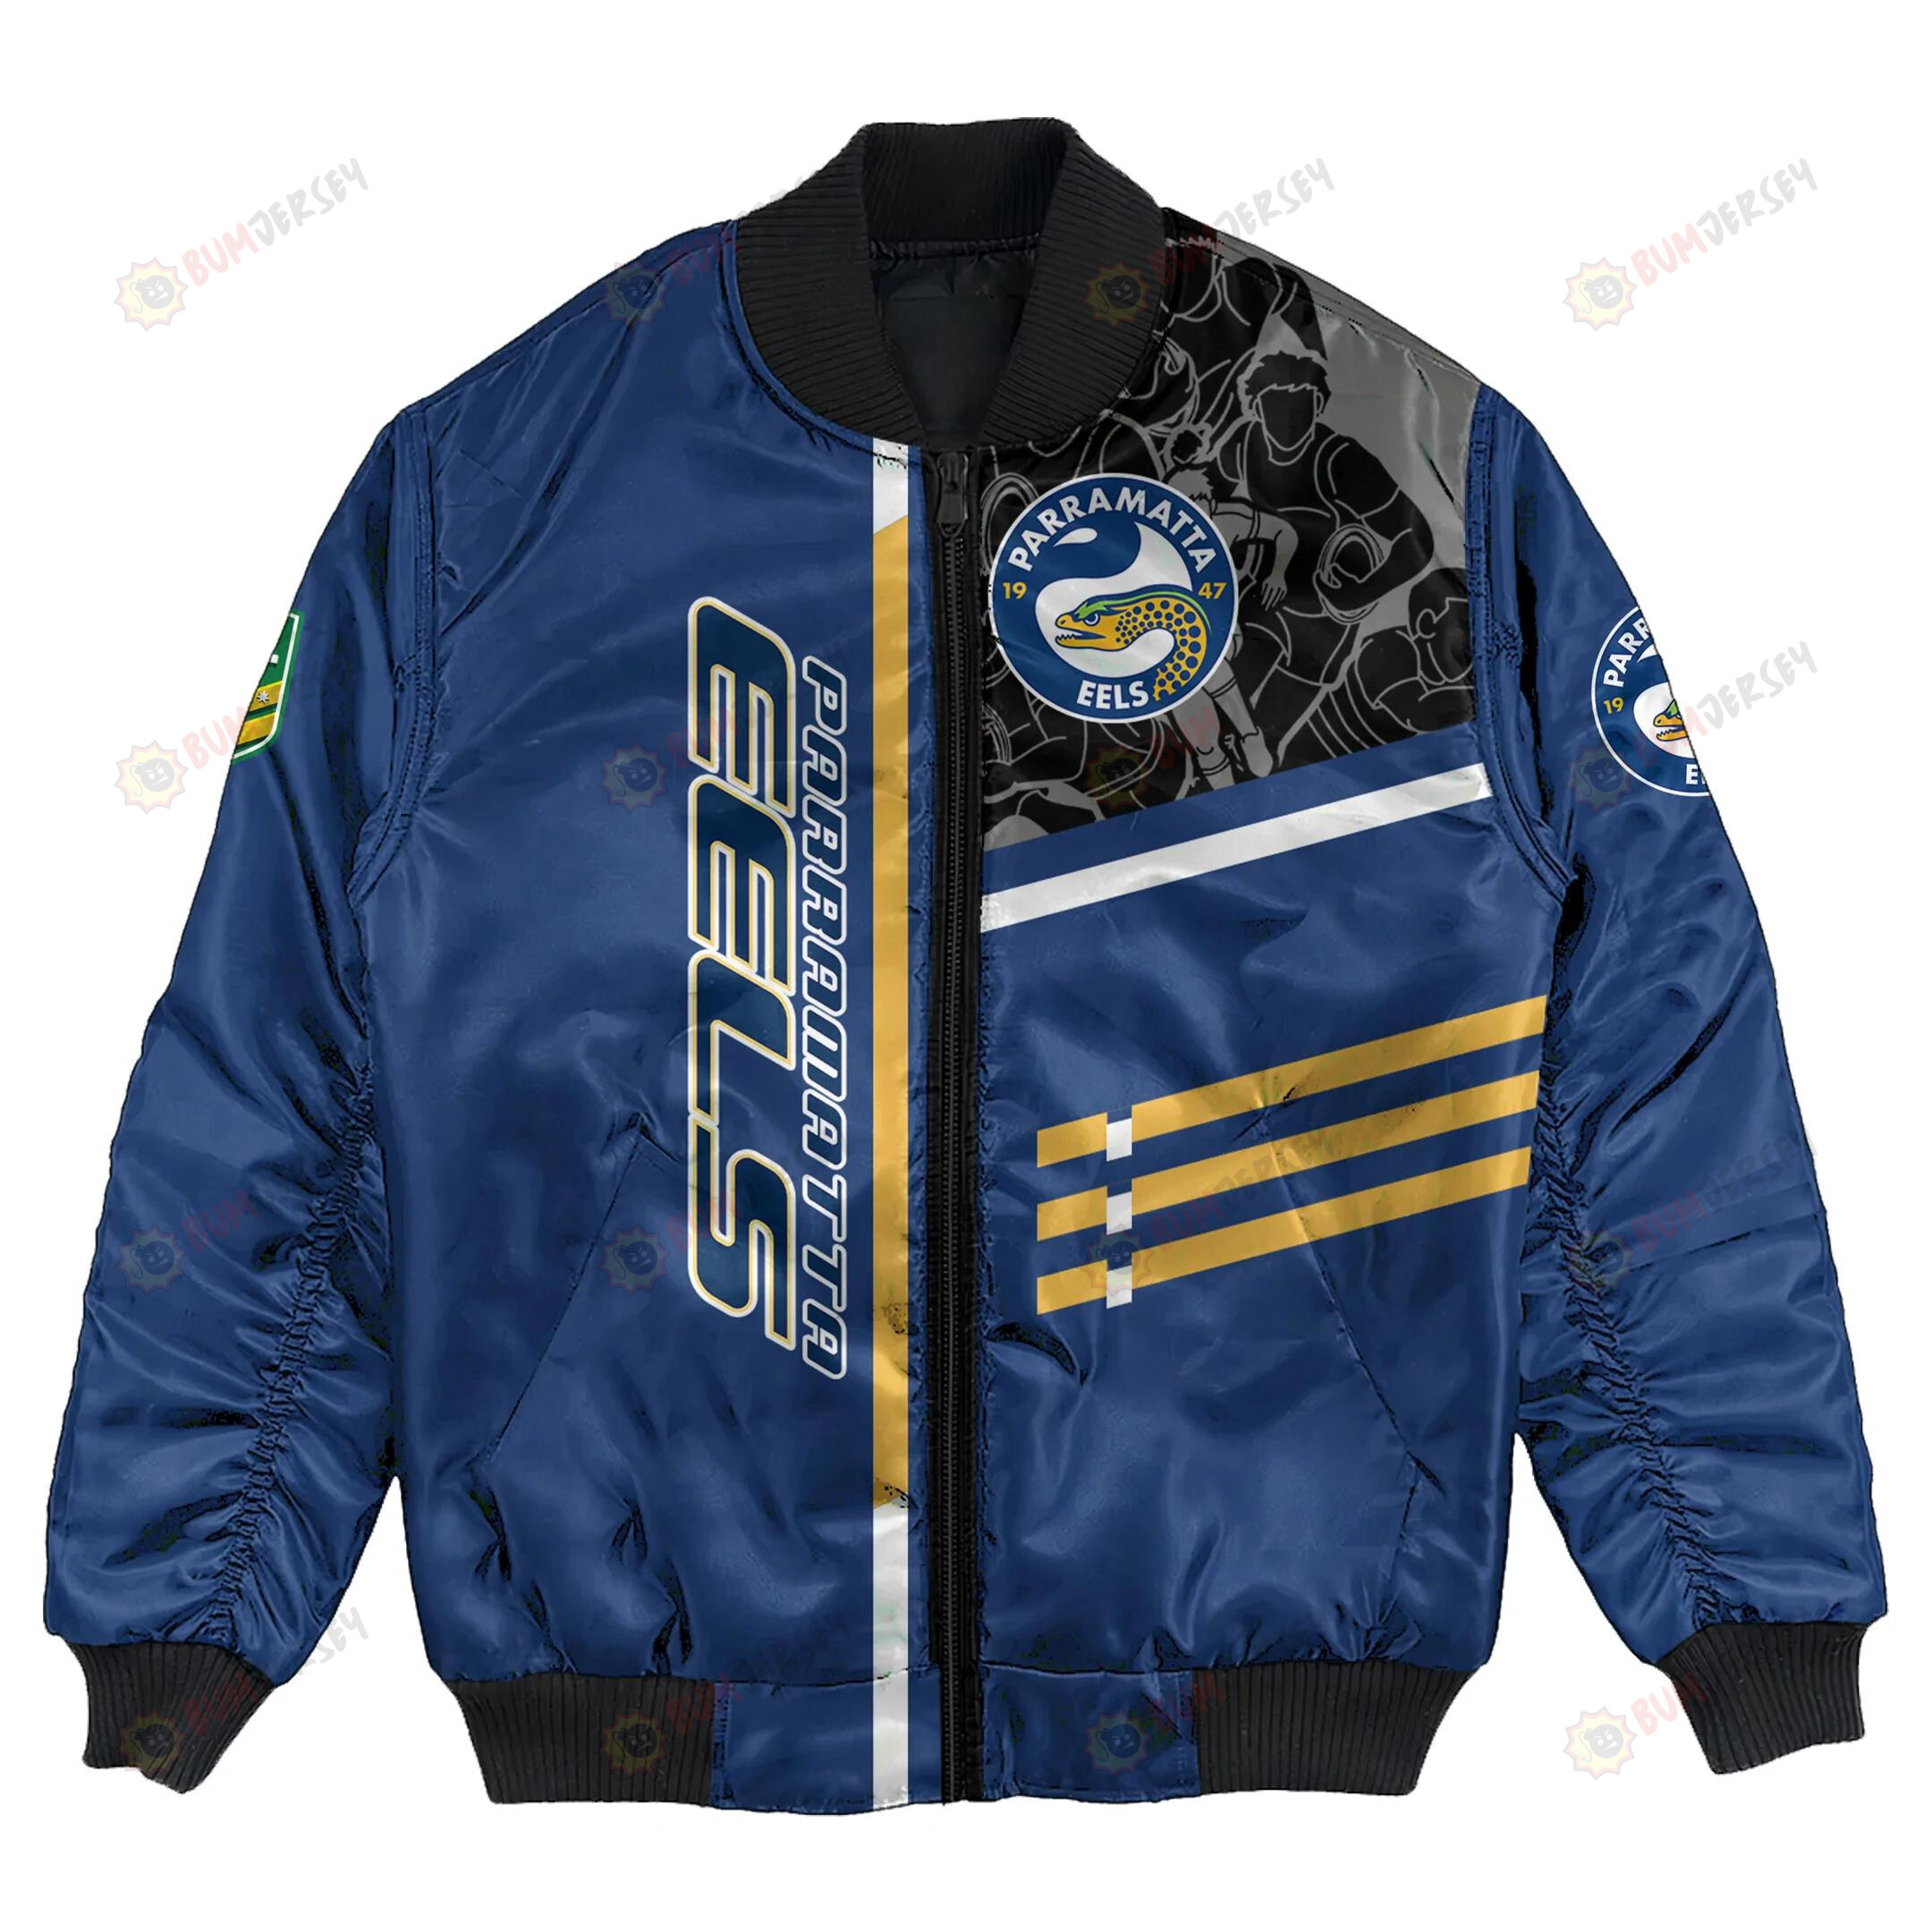 Parramatta Eels Bomber Jacket 3D Printed Personalized Rugby For Fan